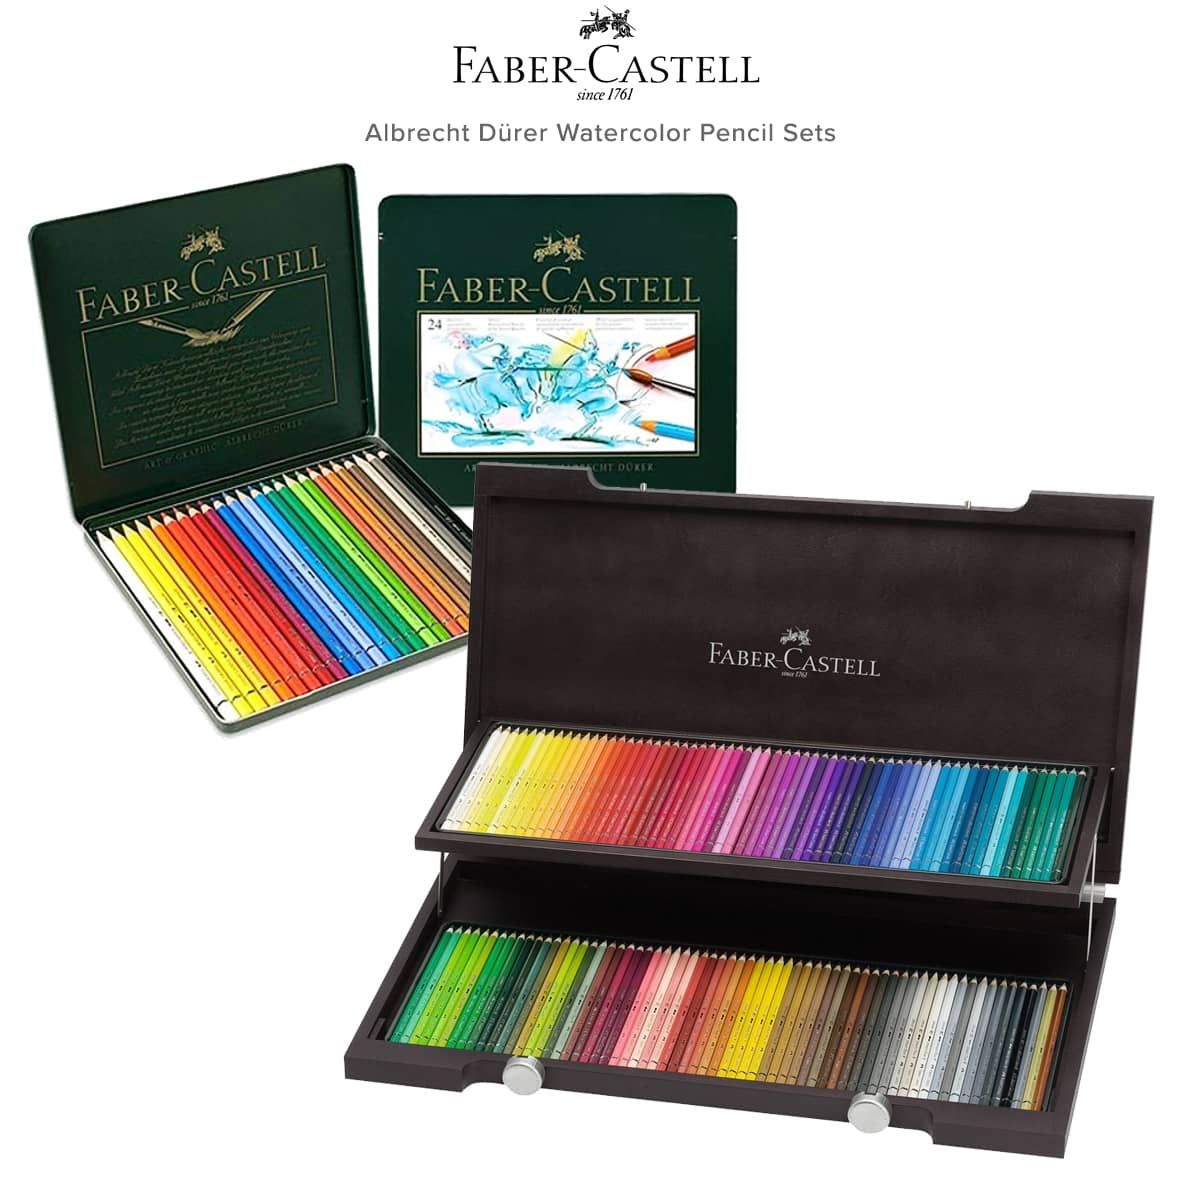 Faber Castell, Black Edition 100 Pencils, My first Look and thoughts.